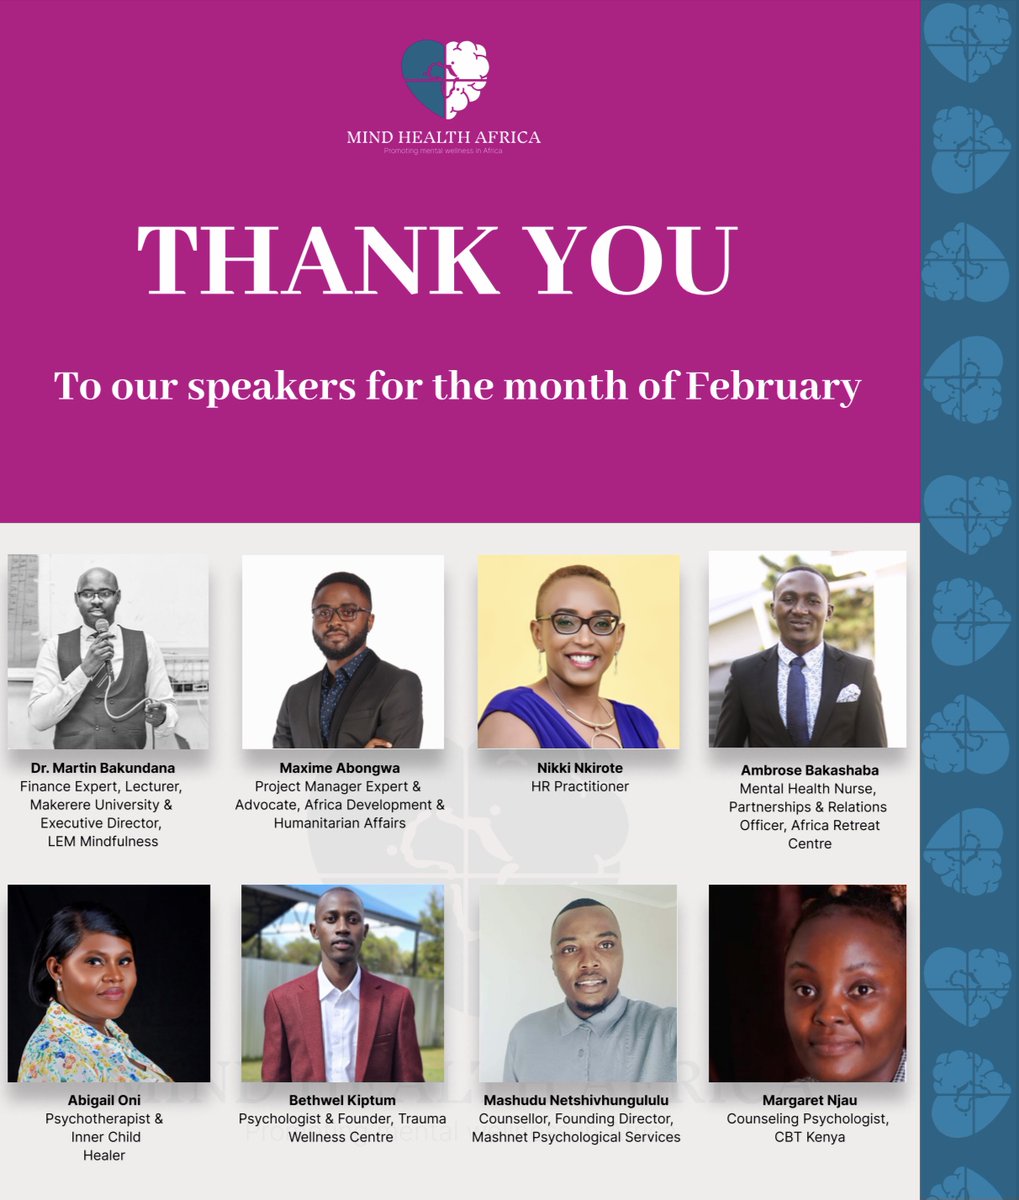 Last month, @mind_health1, started Money Mondays & Wellness Wednesdays Series. It's been a journey of learning, faith, & pushing past fear. Join me in expressing deepest gratitude to our speakers. 🎉 Summaries in English & French: drive.google.com/drive/folders/… @Talk2Abby_ @Bethu_kip